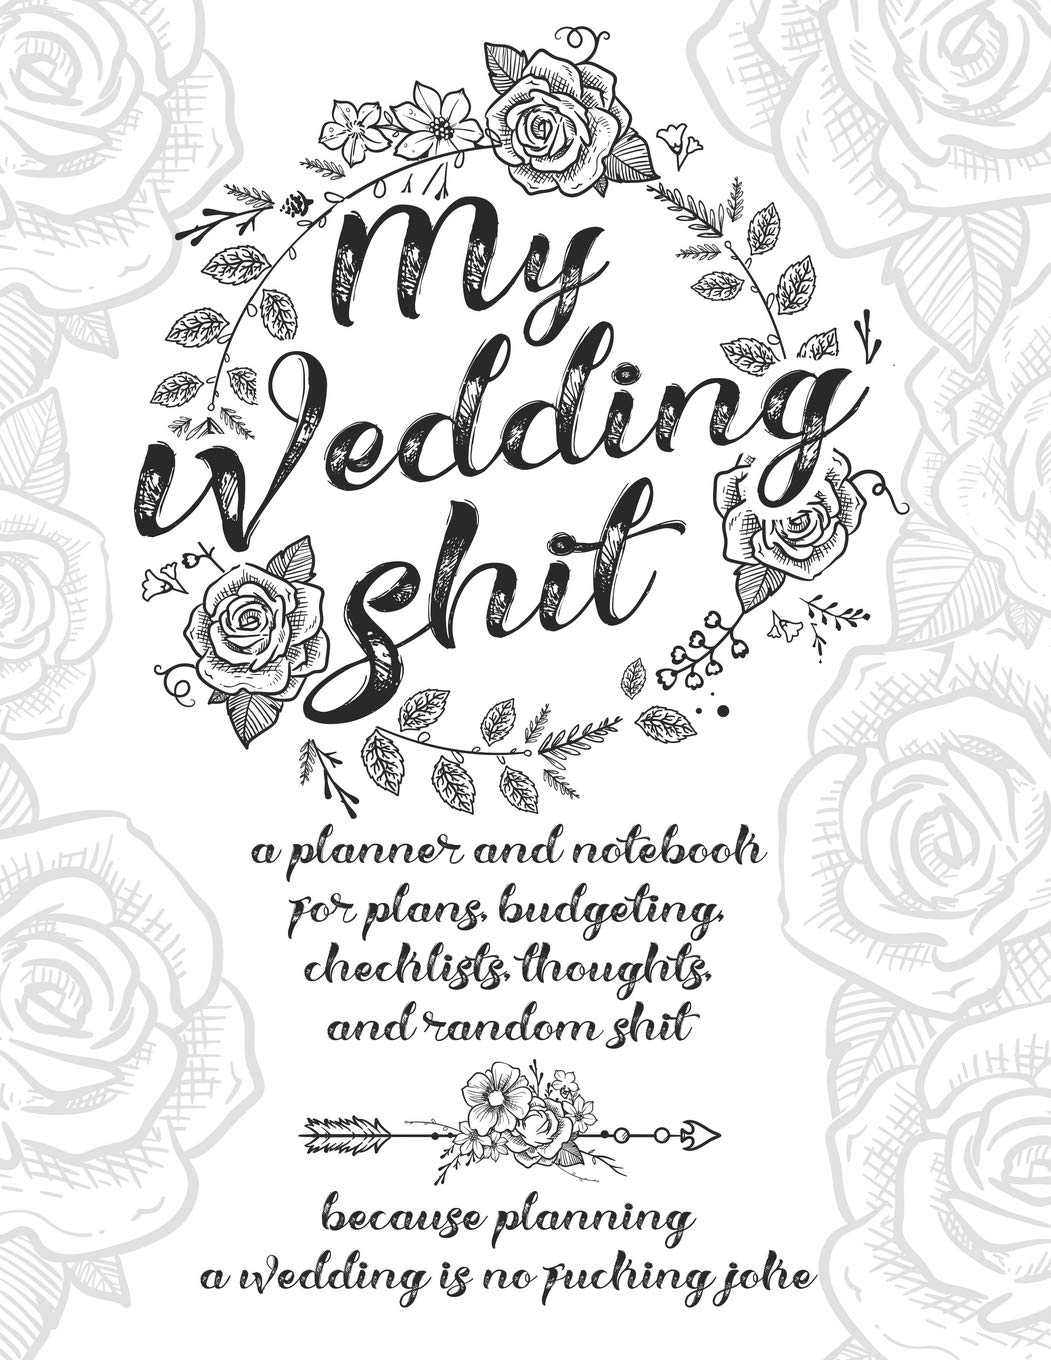 My Wedding Shit: A Planner and Notebook for Plans, Budgeting, Checklists, Thoughts, and Random Shit Because Planning a Wedding Is No Fucking Joke by Wedding Planner Press on Amazon